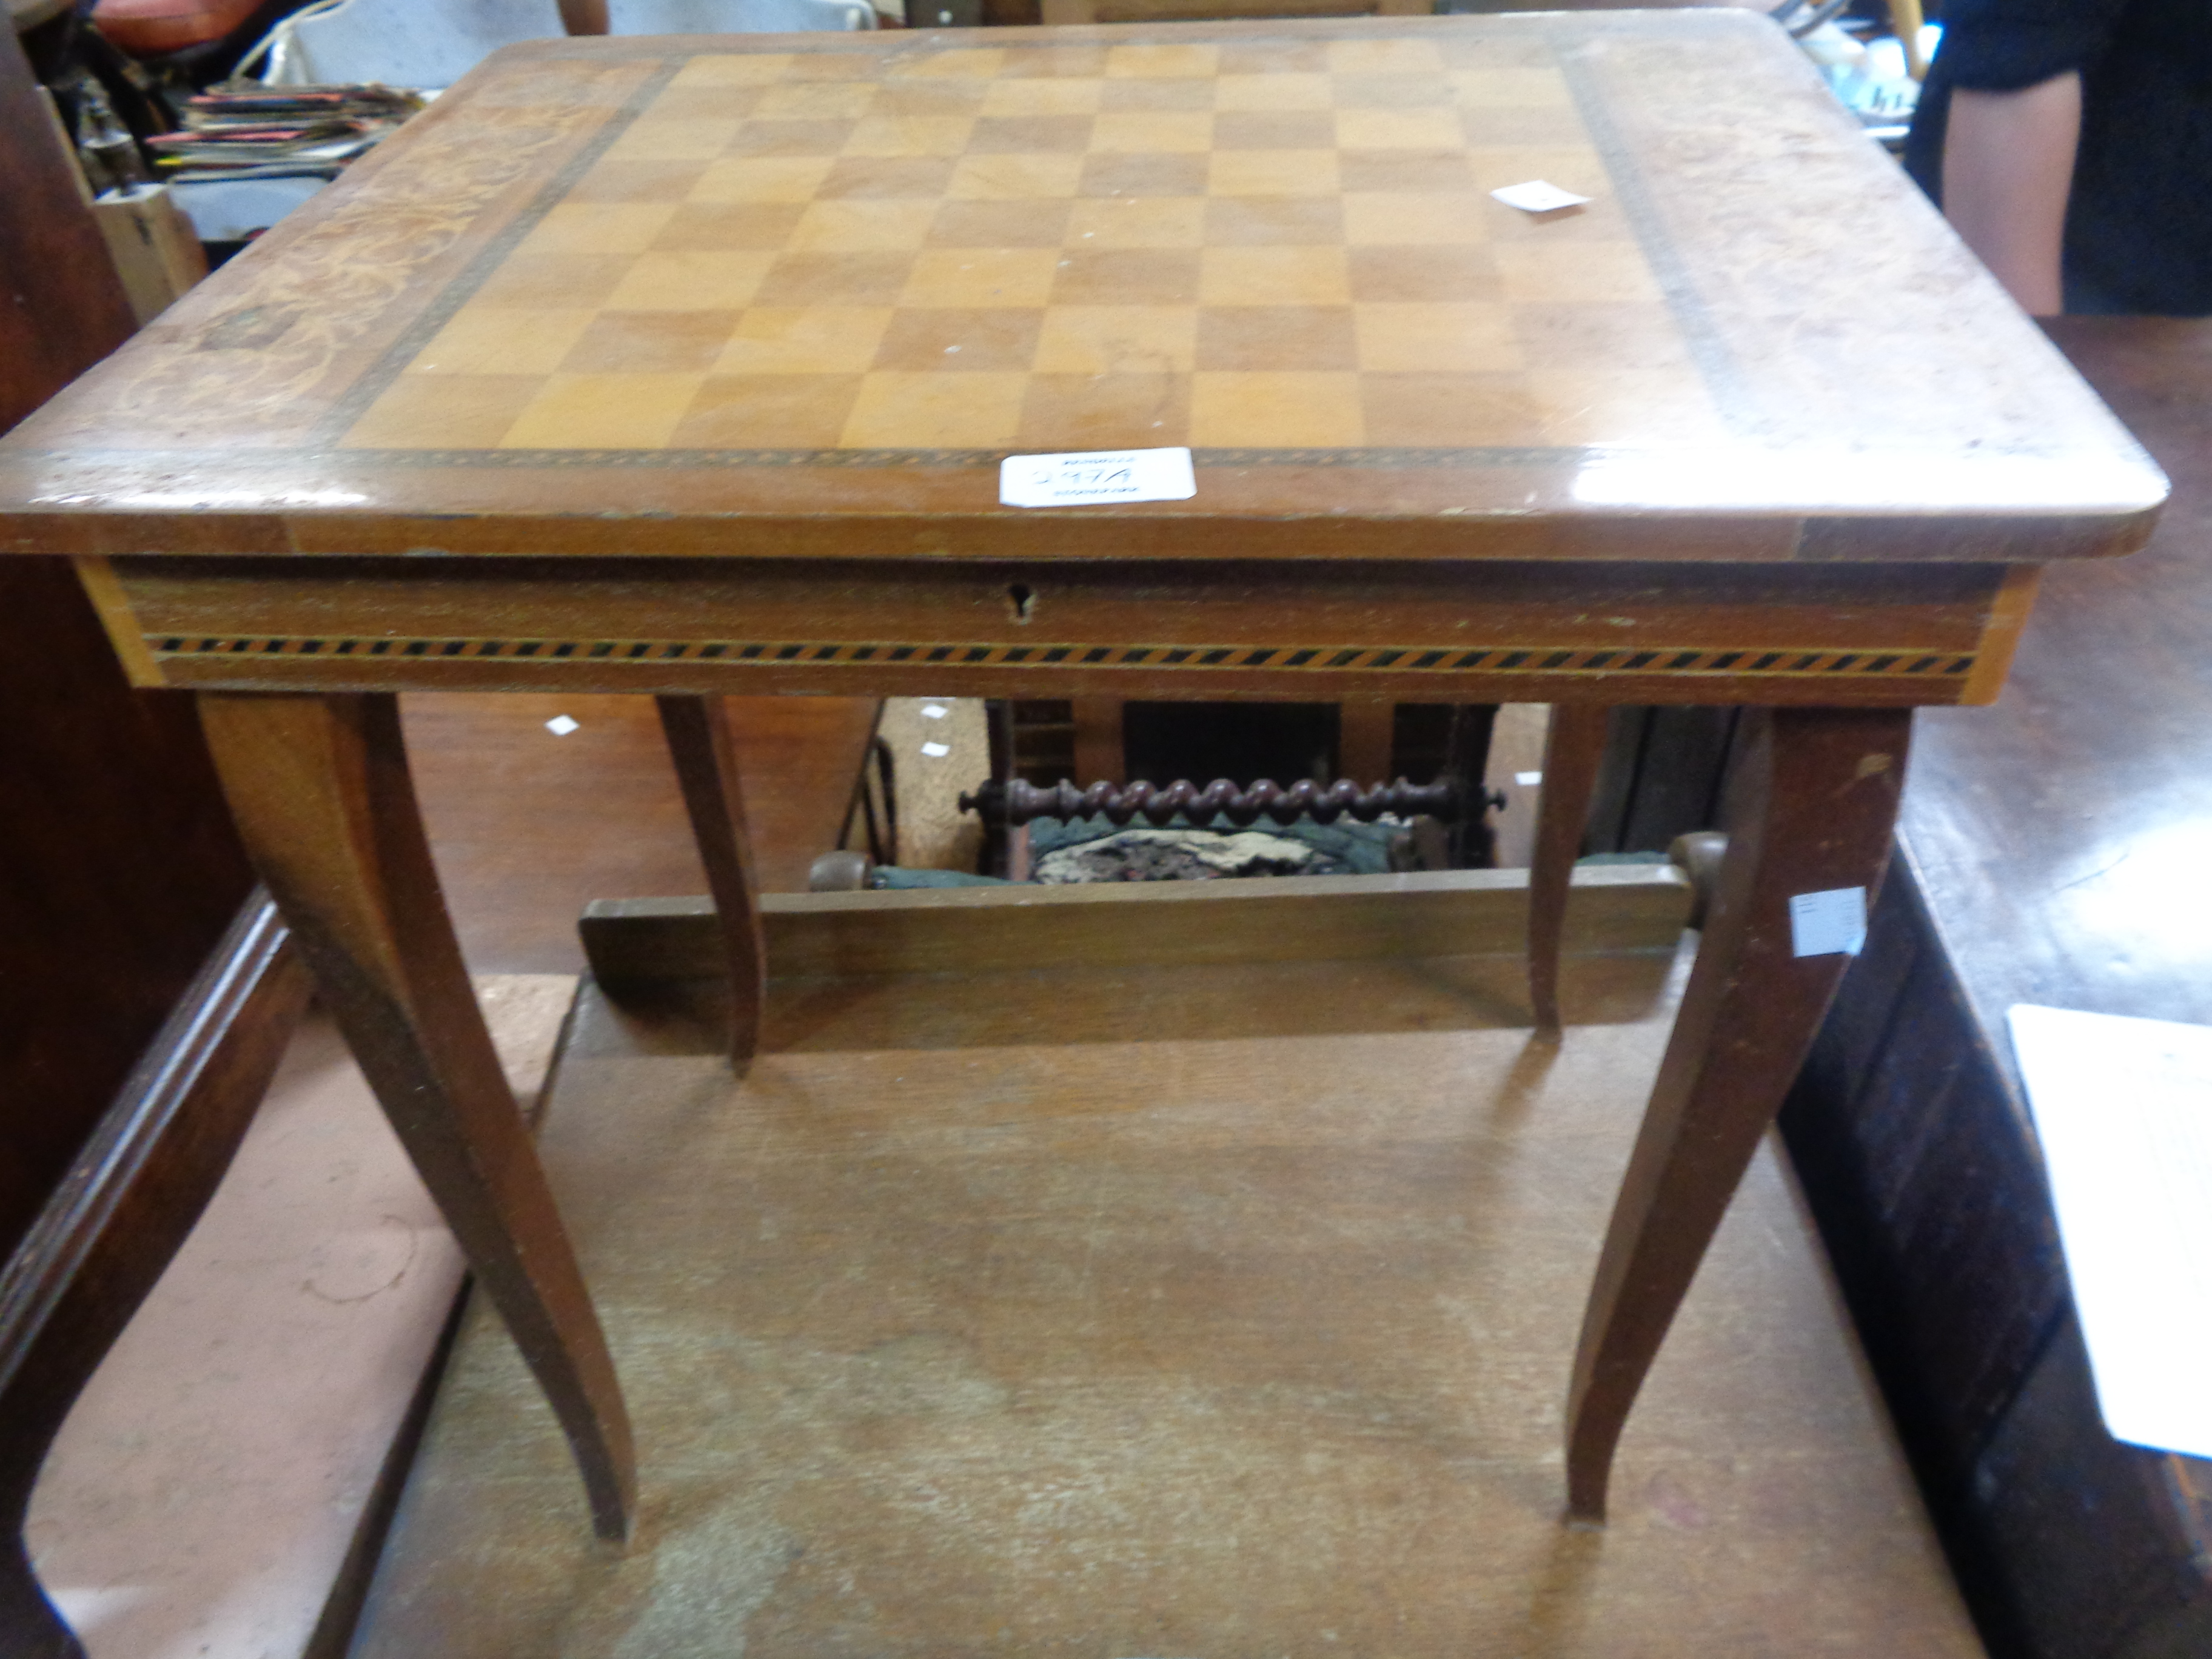 A Sorrento ware lift-top games table with musical movement